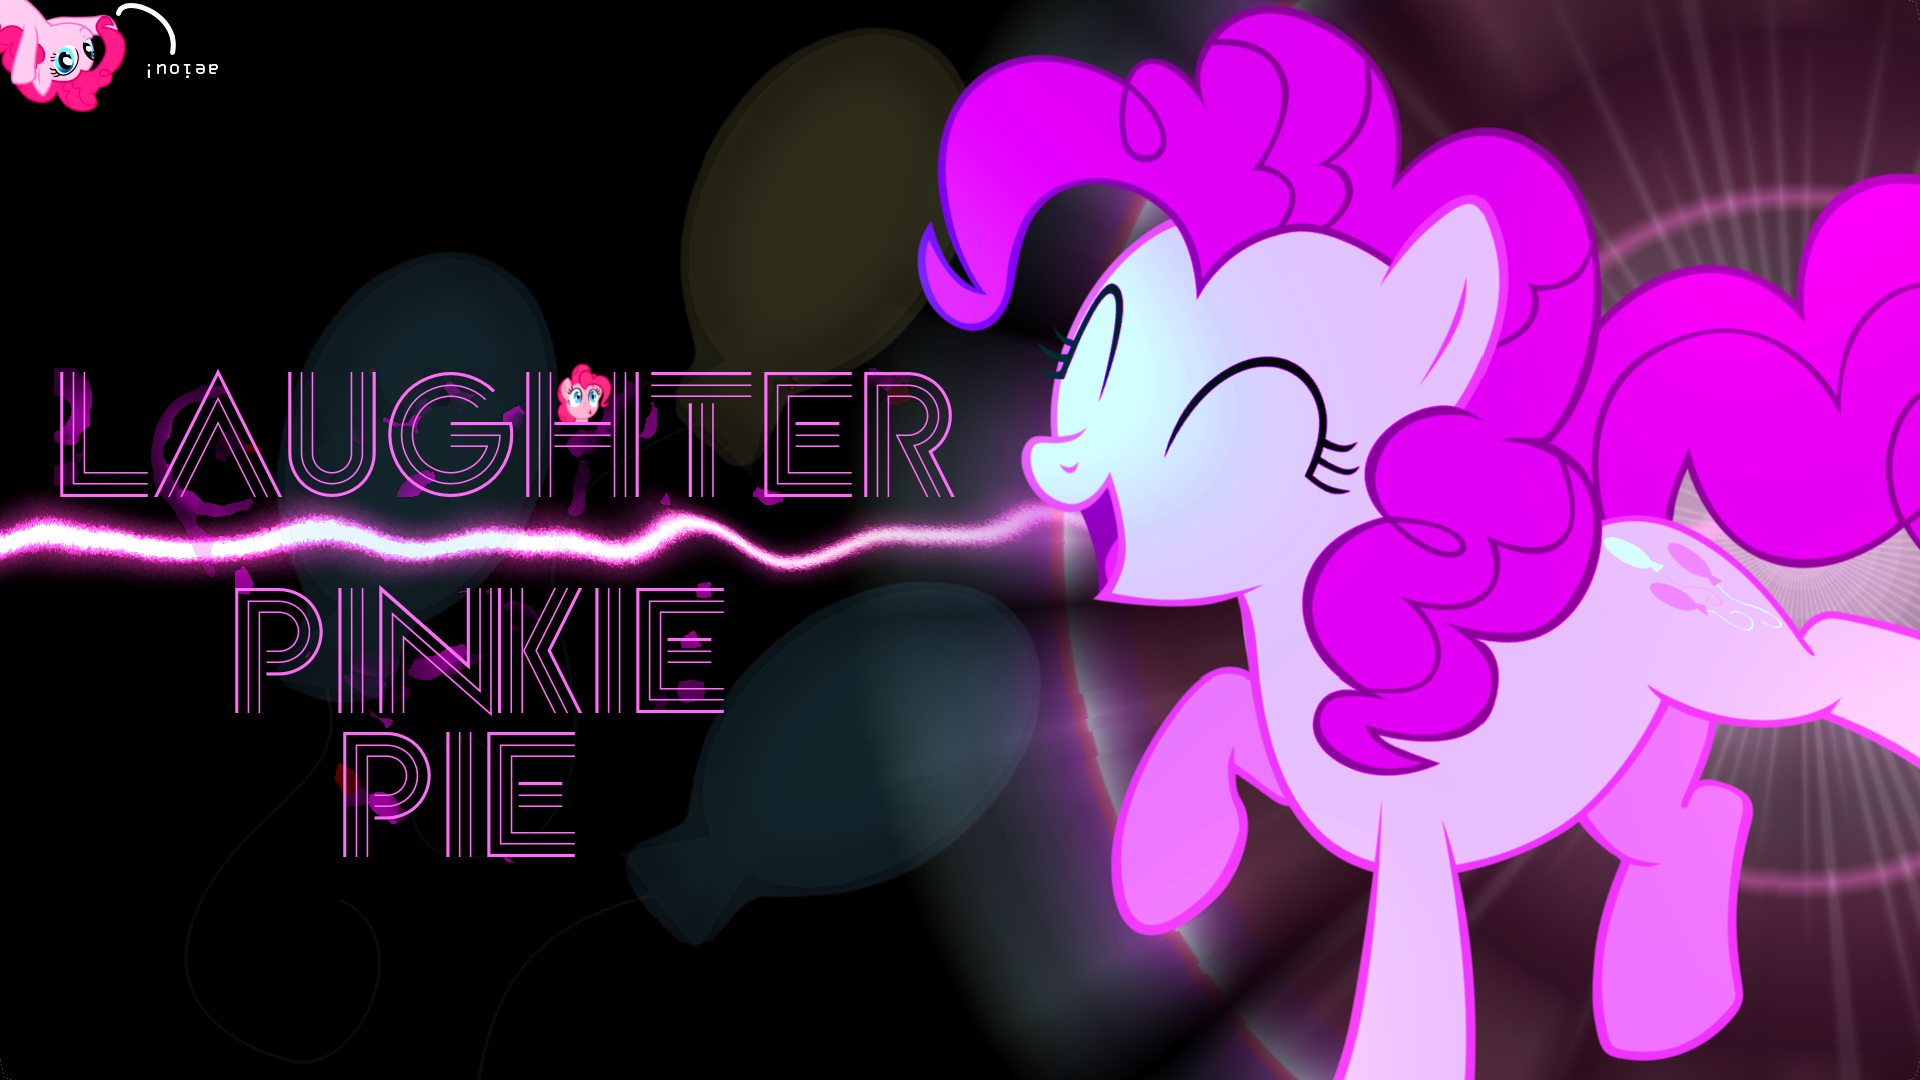 Shiny-shiny pretty lights wallpaper pack. by AtomicGreymon, BlackGryph0n, Clueless313, dropletx1 and Takua770